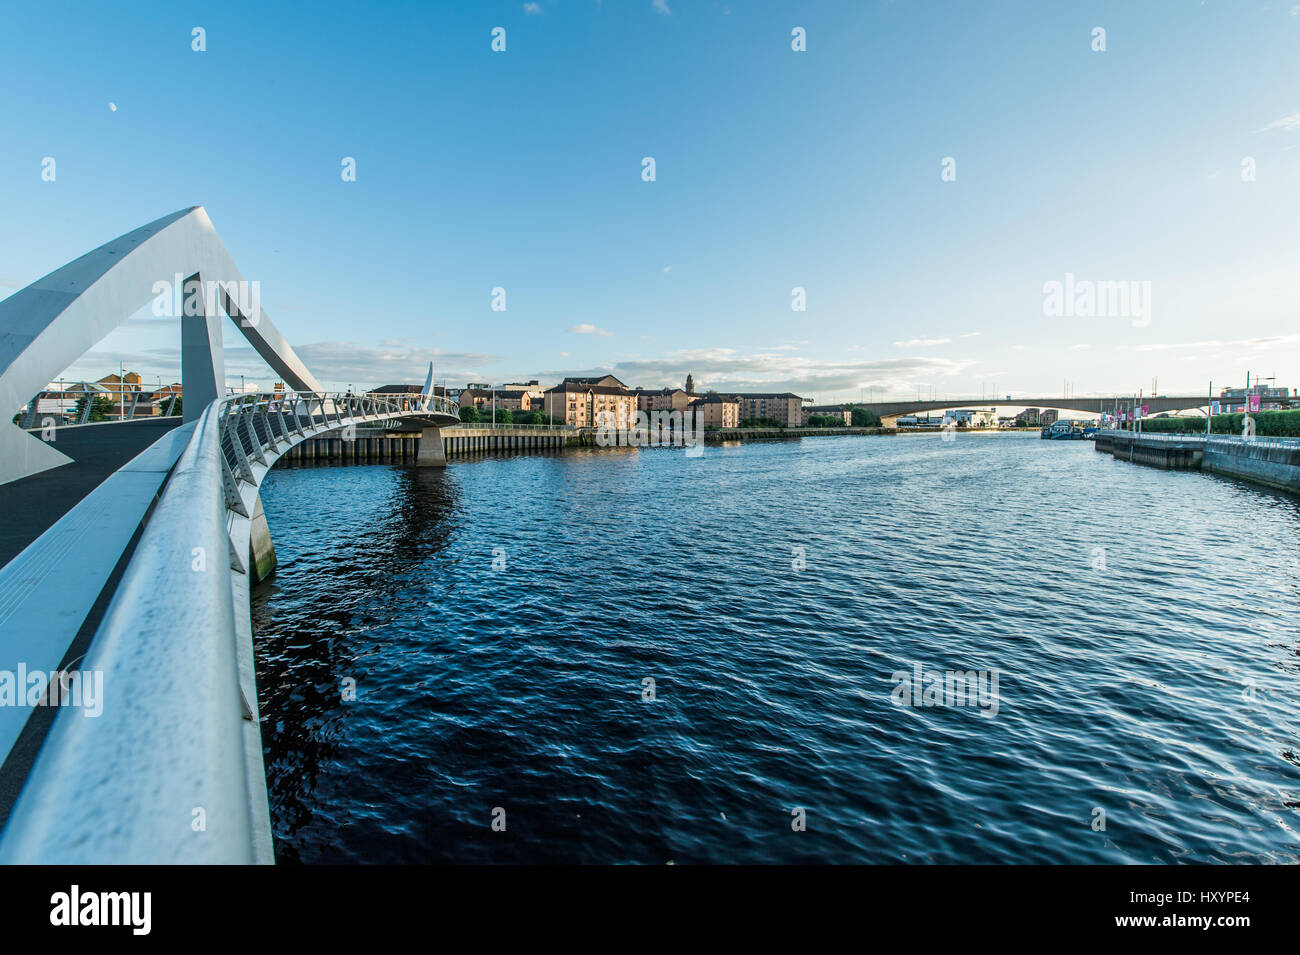 View of Glasgow's Tradeston Bridge on River Clyde from its North Bank Stock Photo